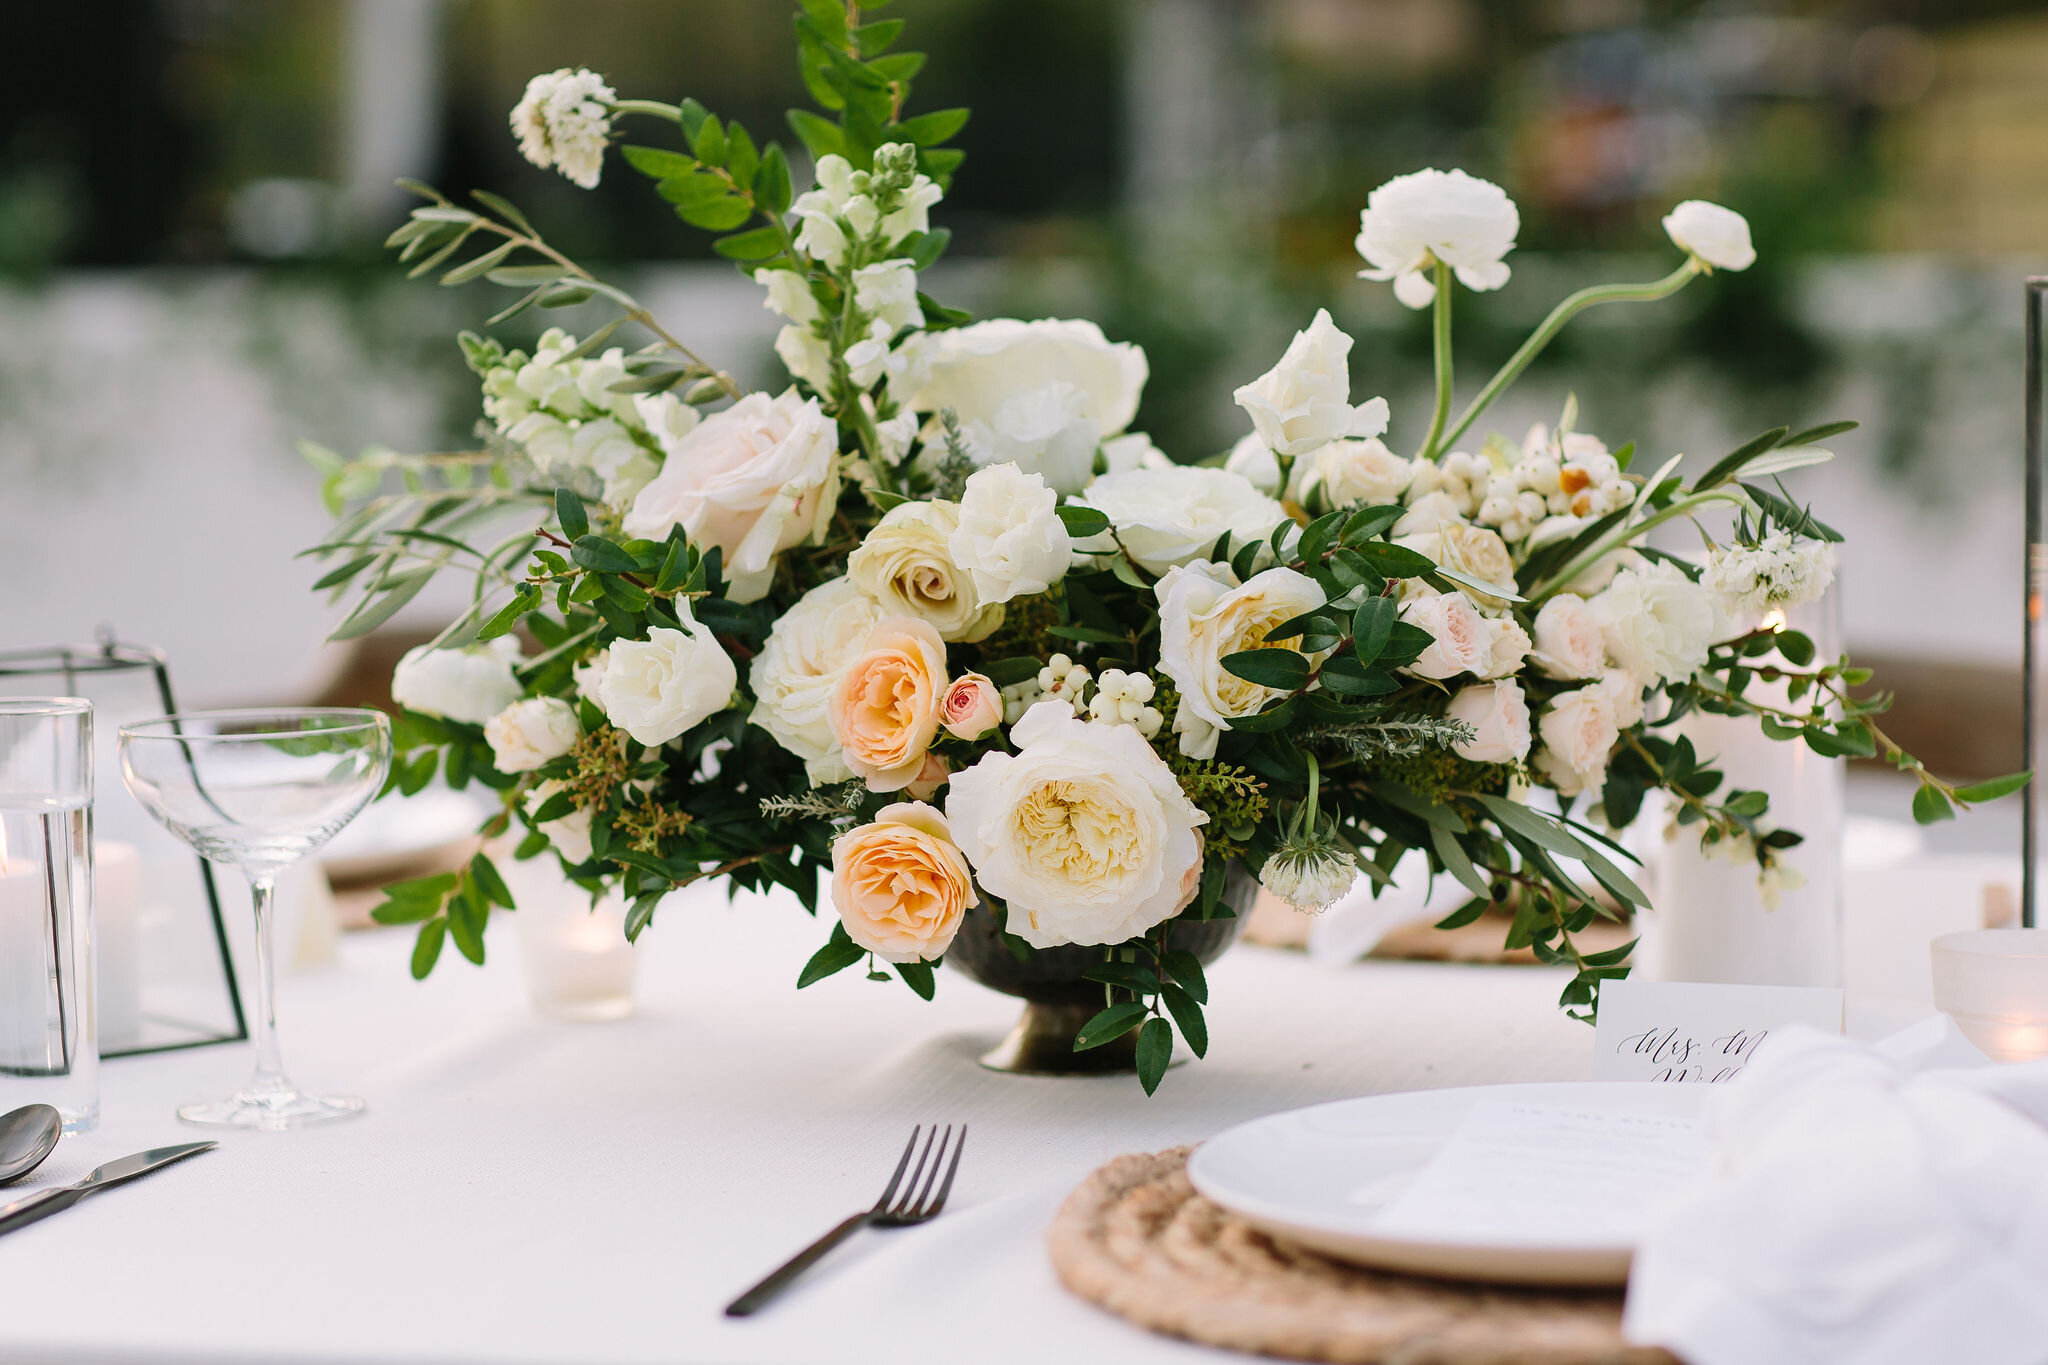 Whimsical floral centerpiece in a gold compote vase with white ranunculus, garden roses, and greenery. Nashville wedding florist at Bloomsbury Farm.